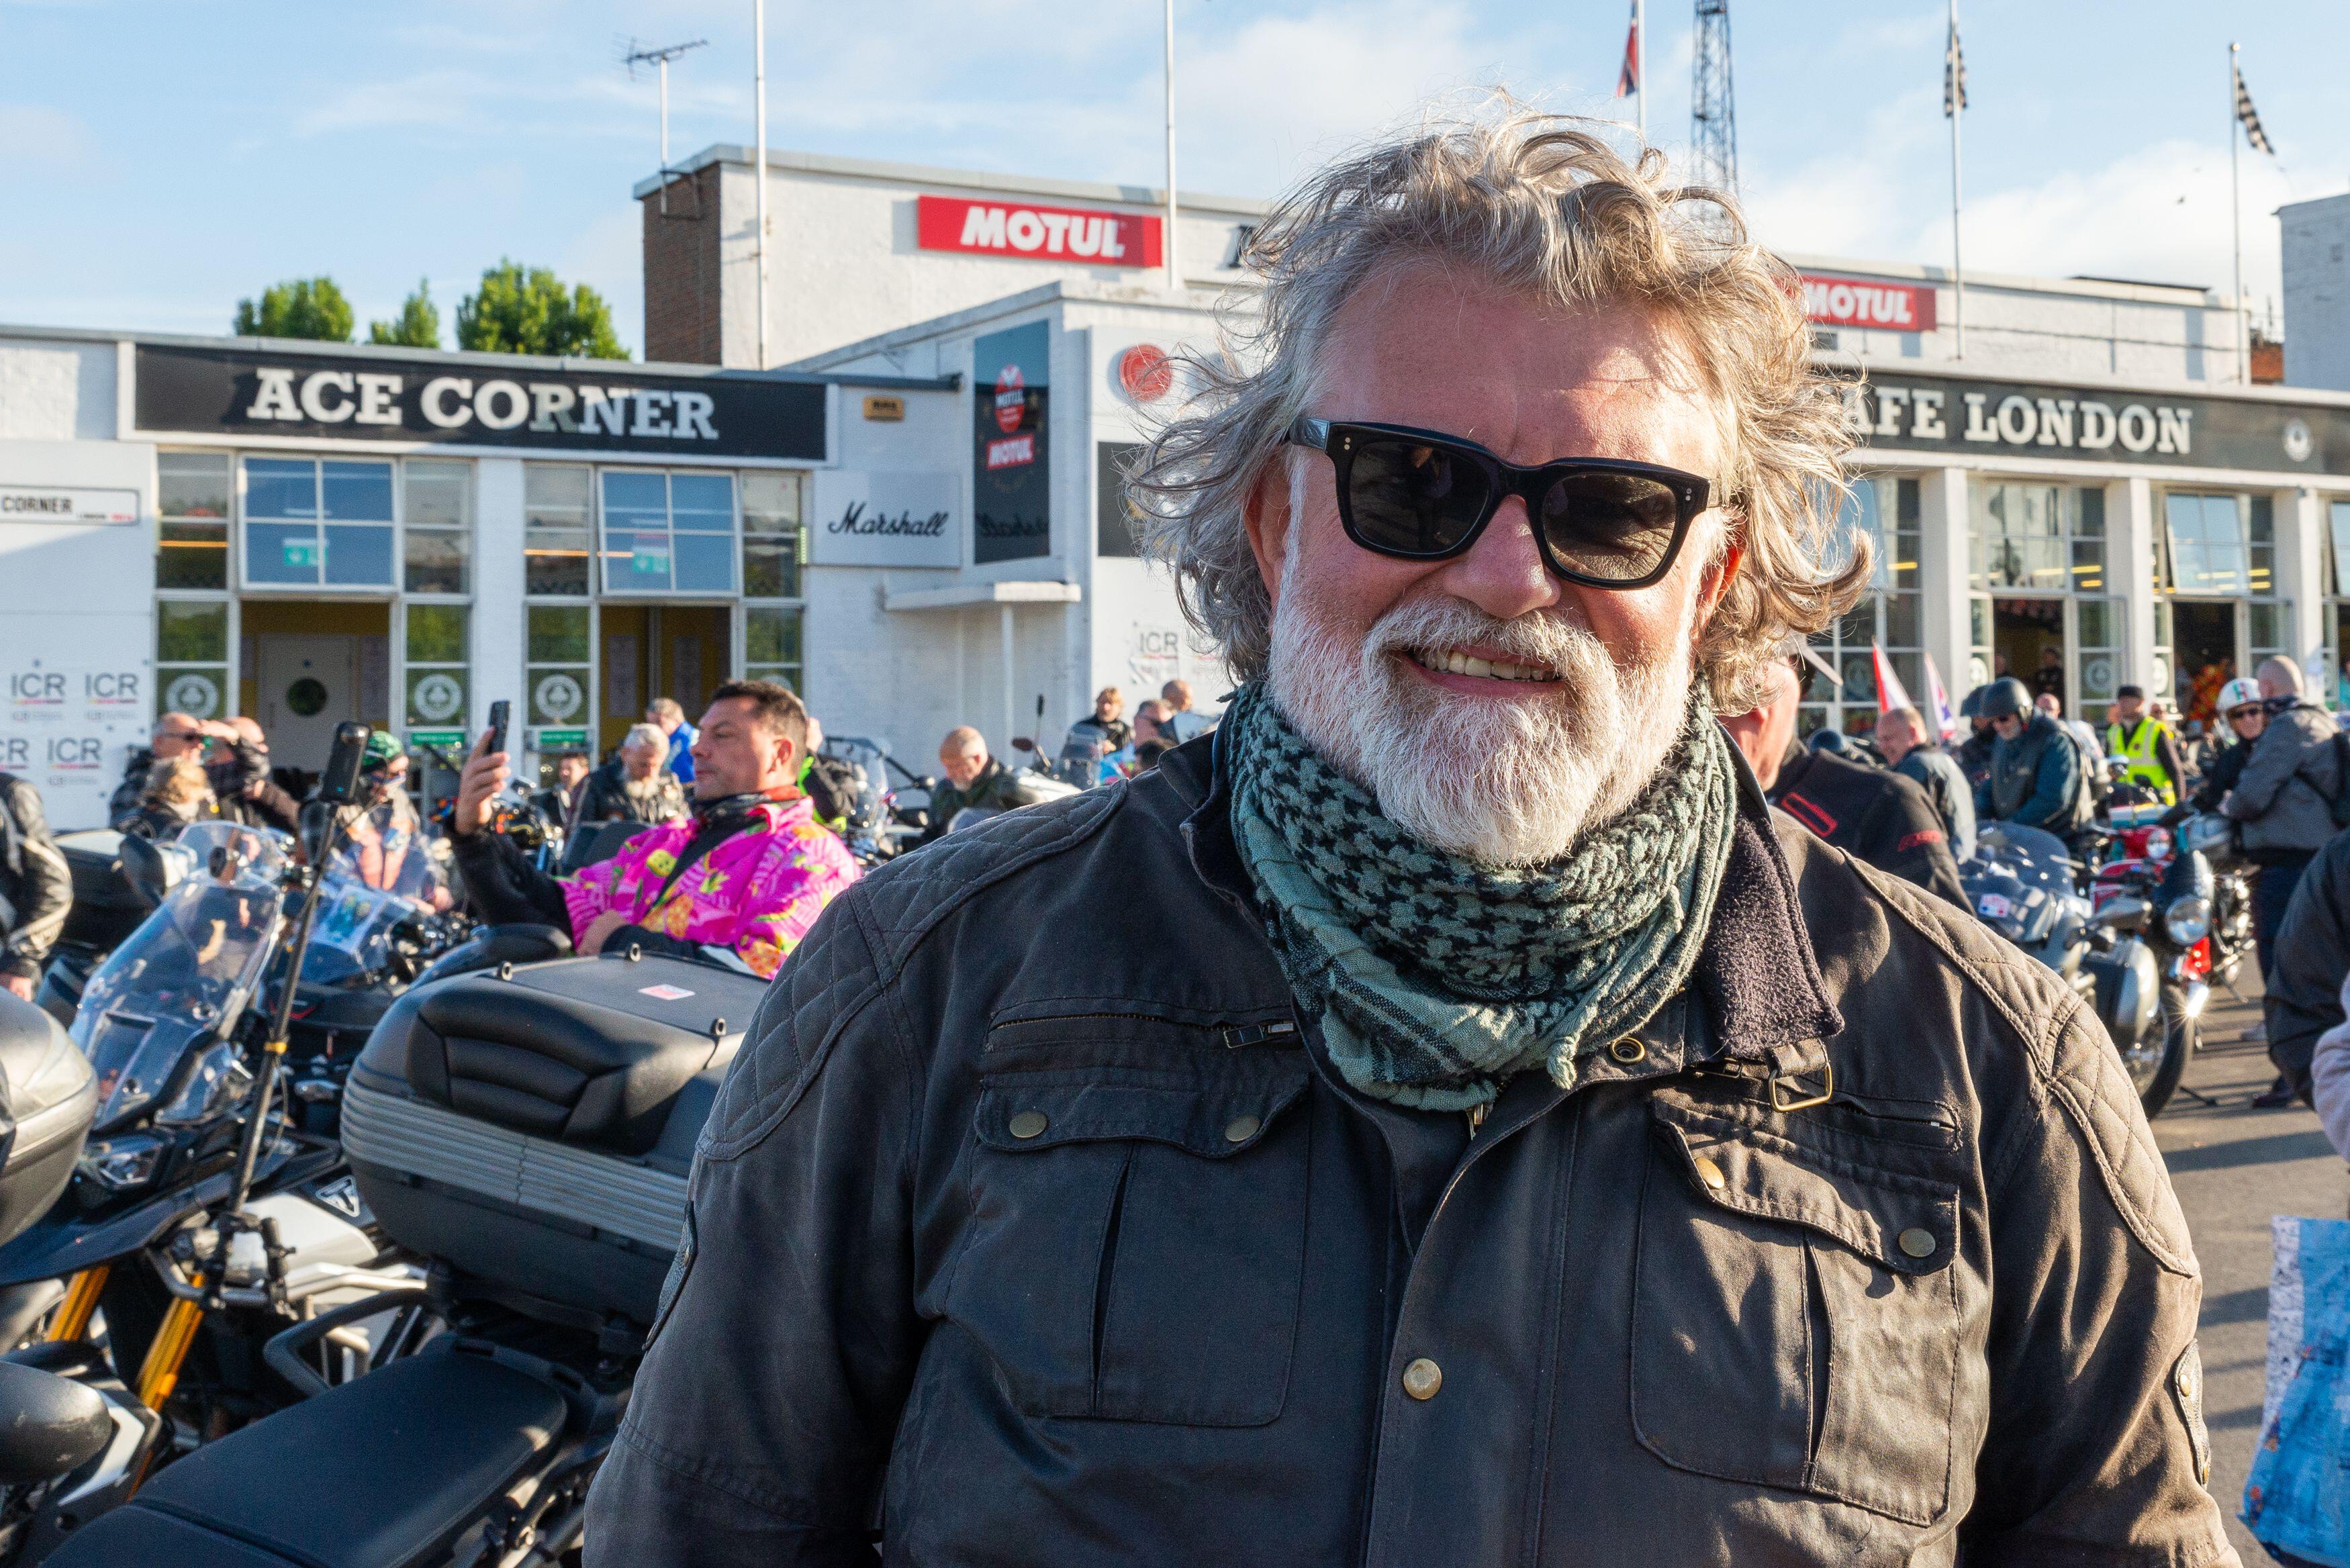 Dave was speaking at a tribute motorbike ride from London to Barrow-in-Furness in Cumbria in Dave's honour